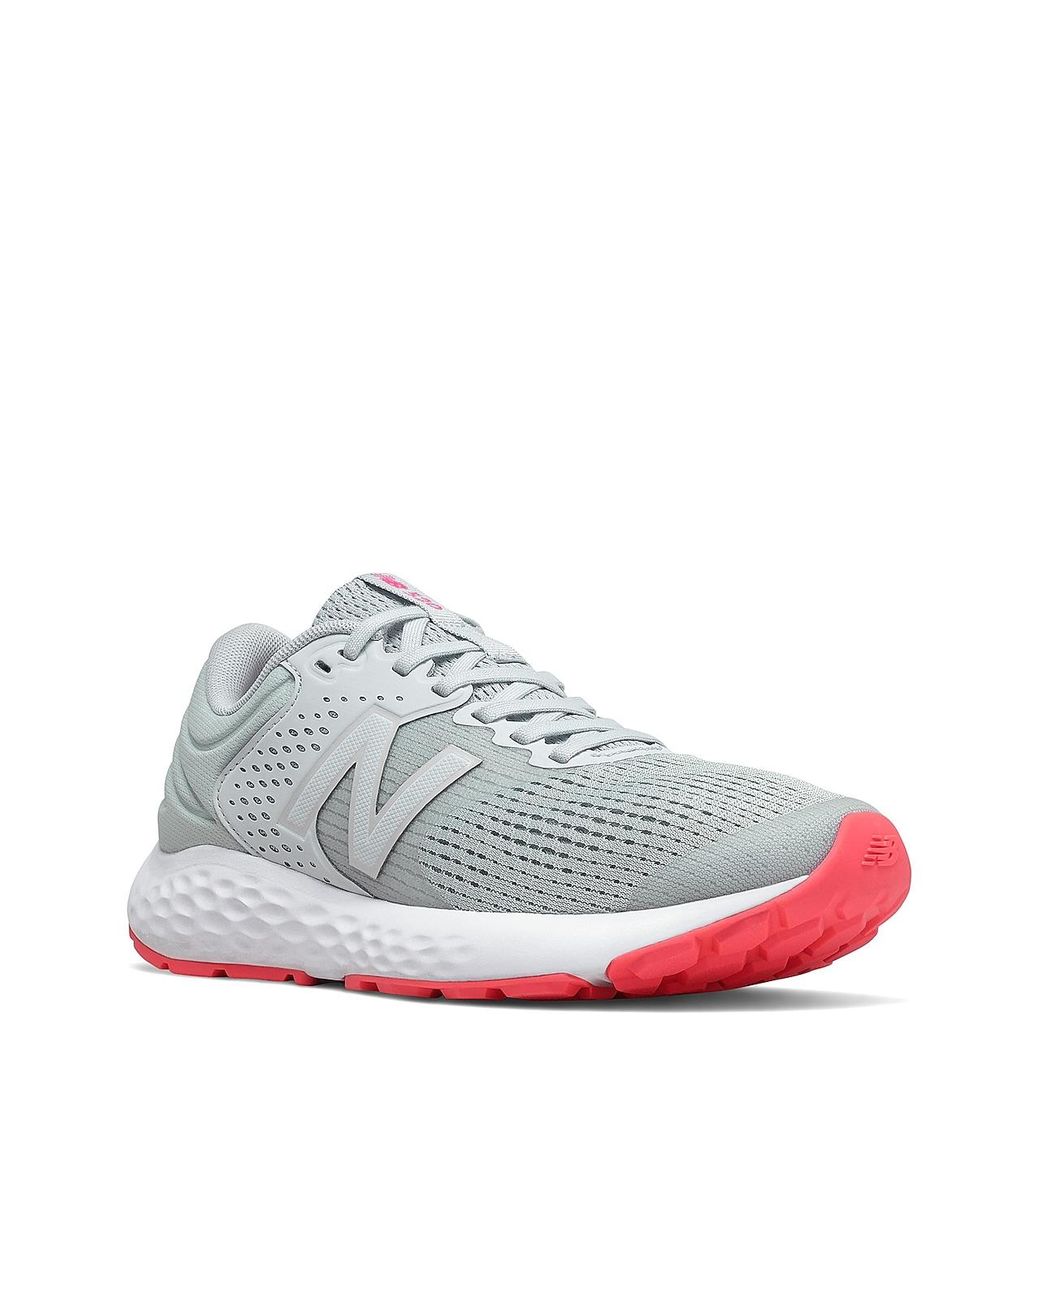 New Balance Rubber 520 V7 Running Shoe in Grey/Pink (Gray) - Lyst